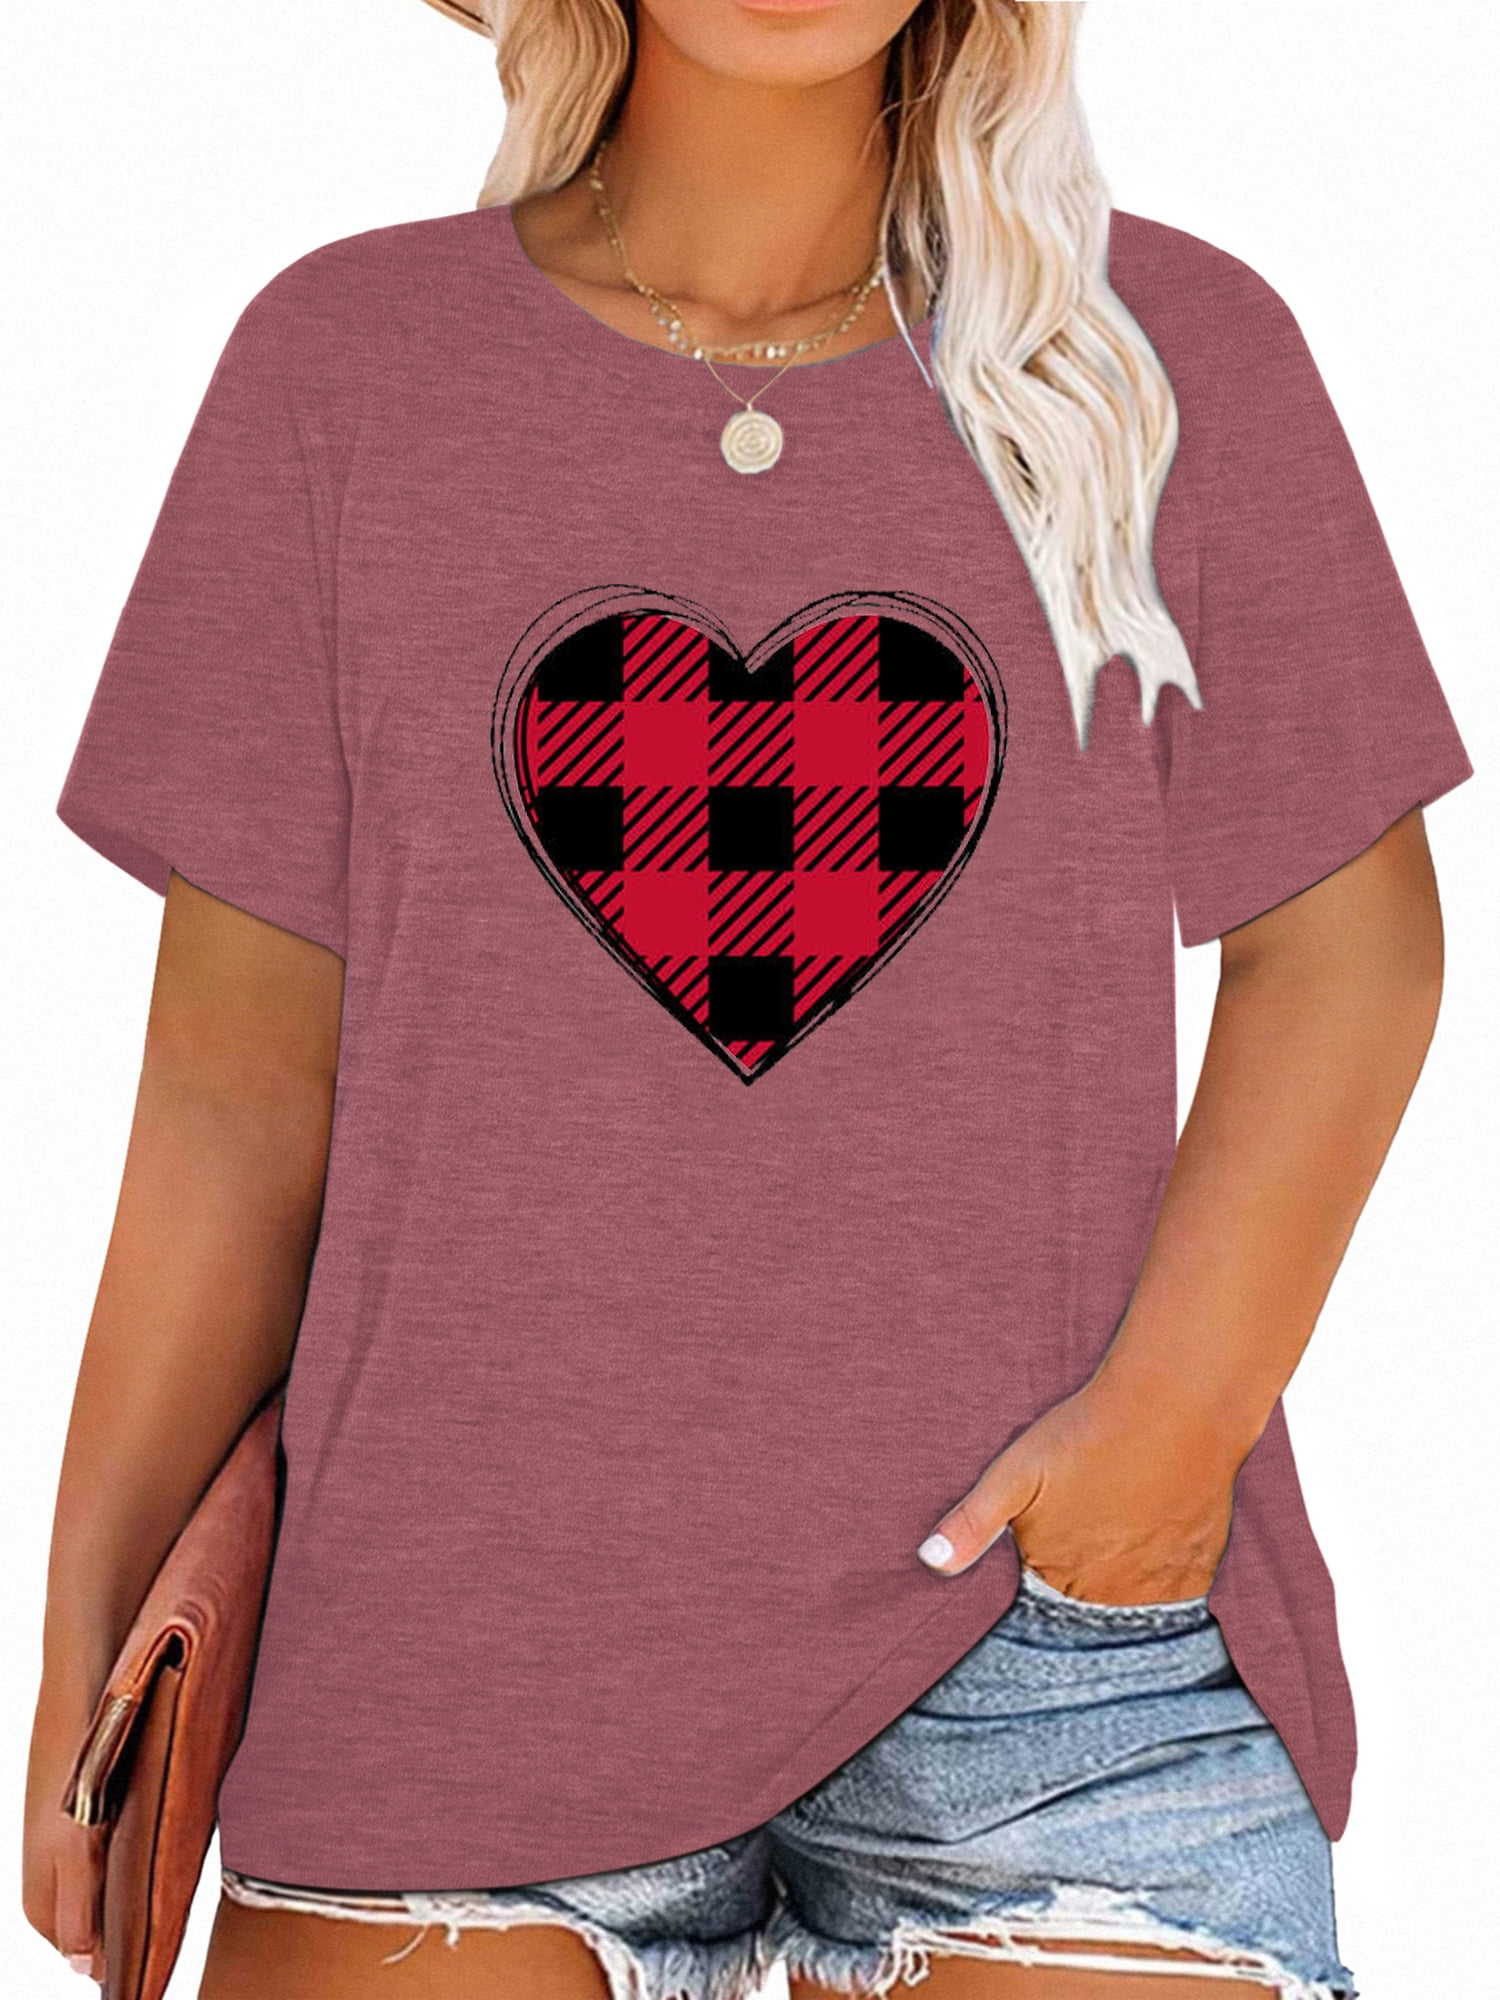 Anbech Plaid Heart Plus Size T-Shirts for Women Graphic Red Heart Print ...